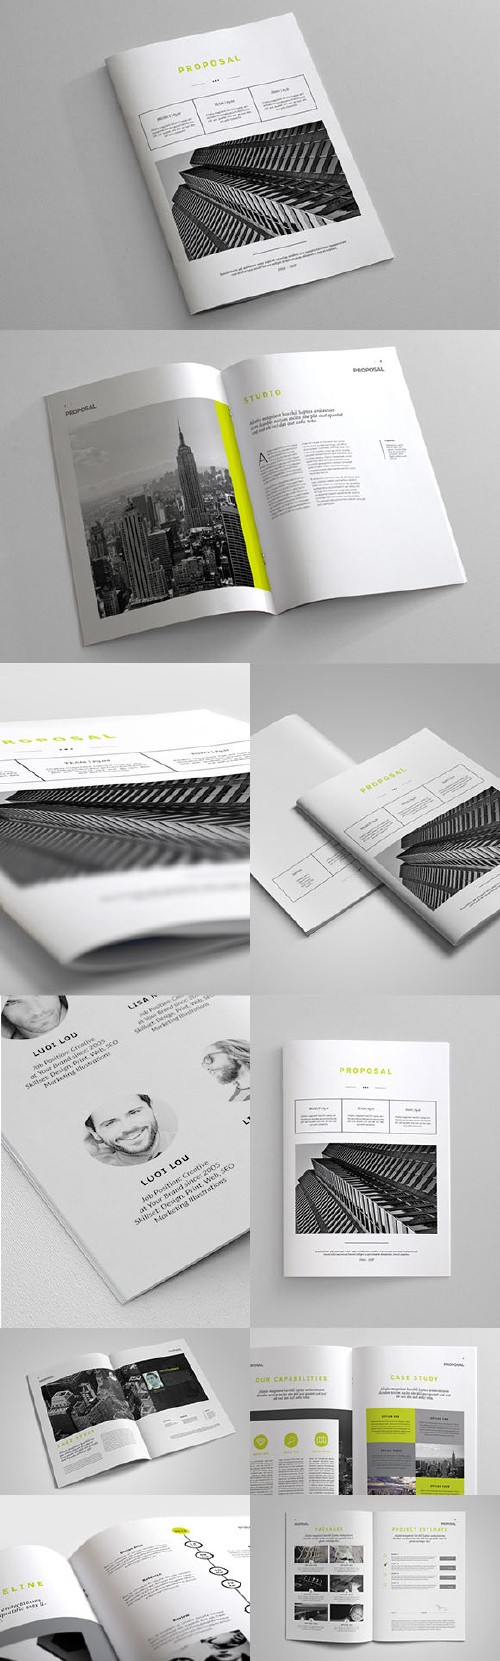 Indesign Business Proposal Template